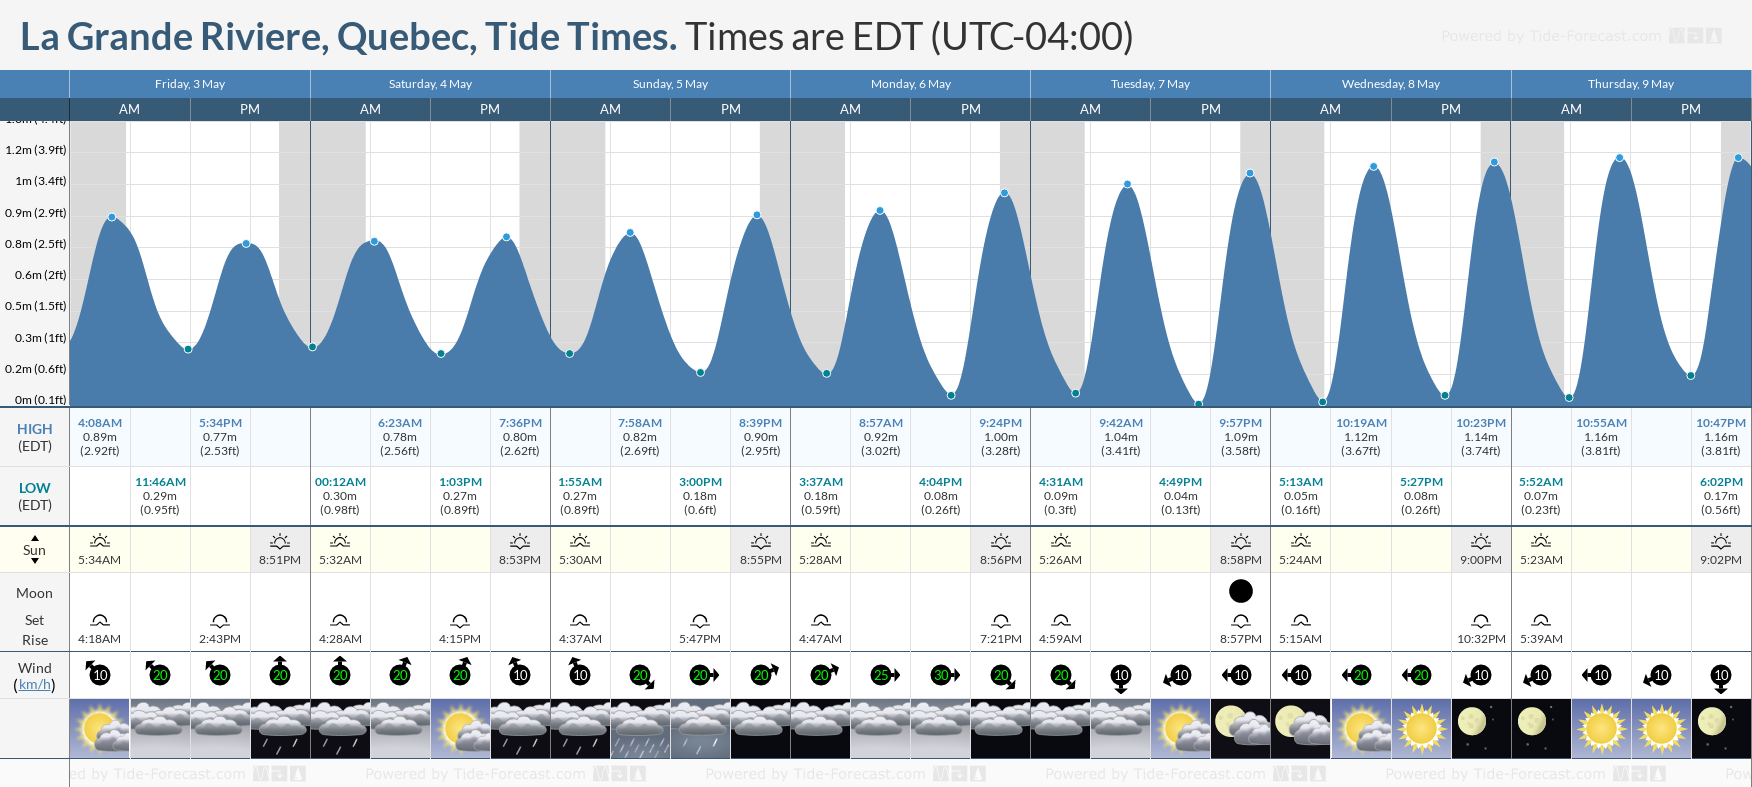 La Grande Riviere, Quebec Tide Chart including high and low tide tide times for the next 7 days